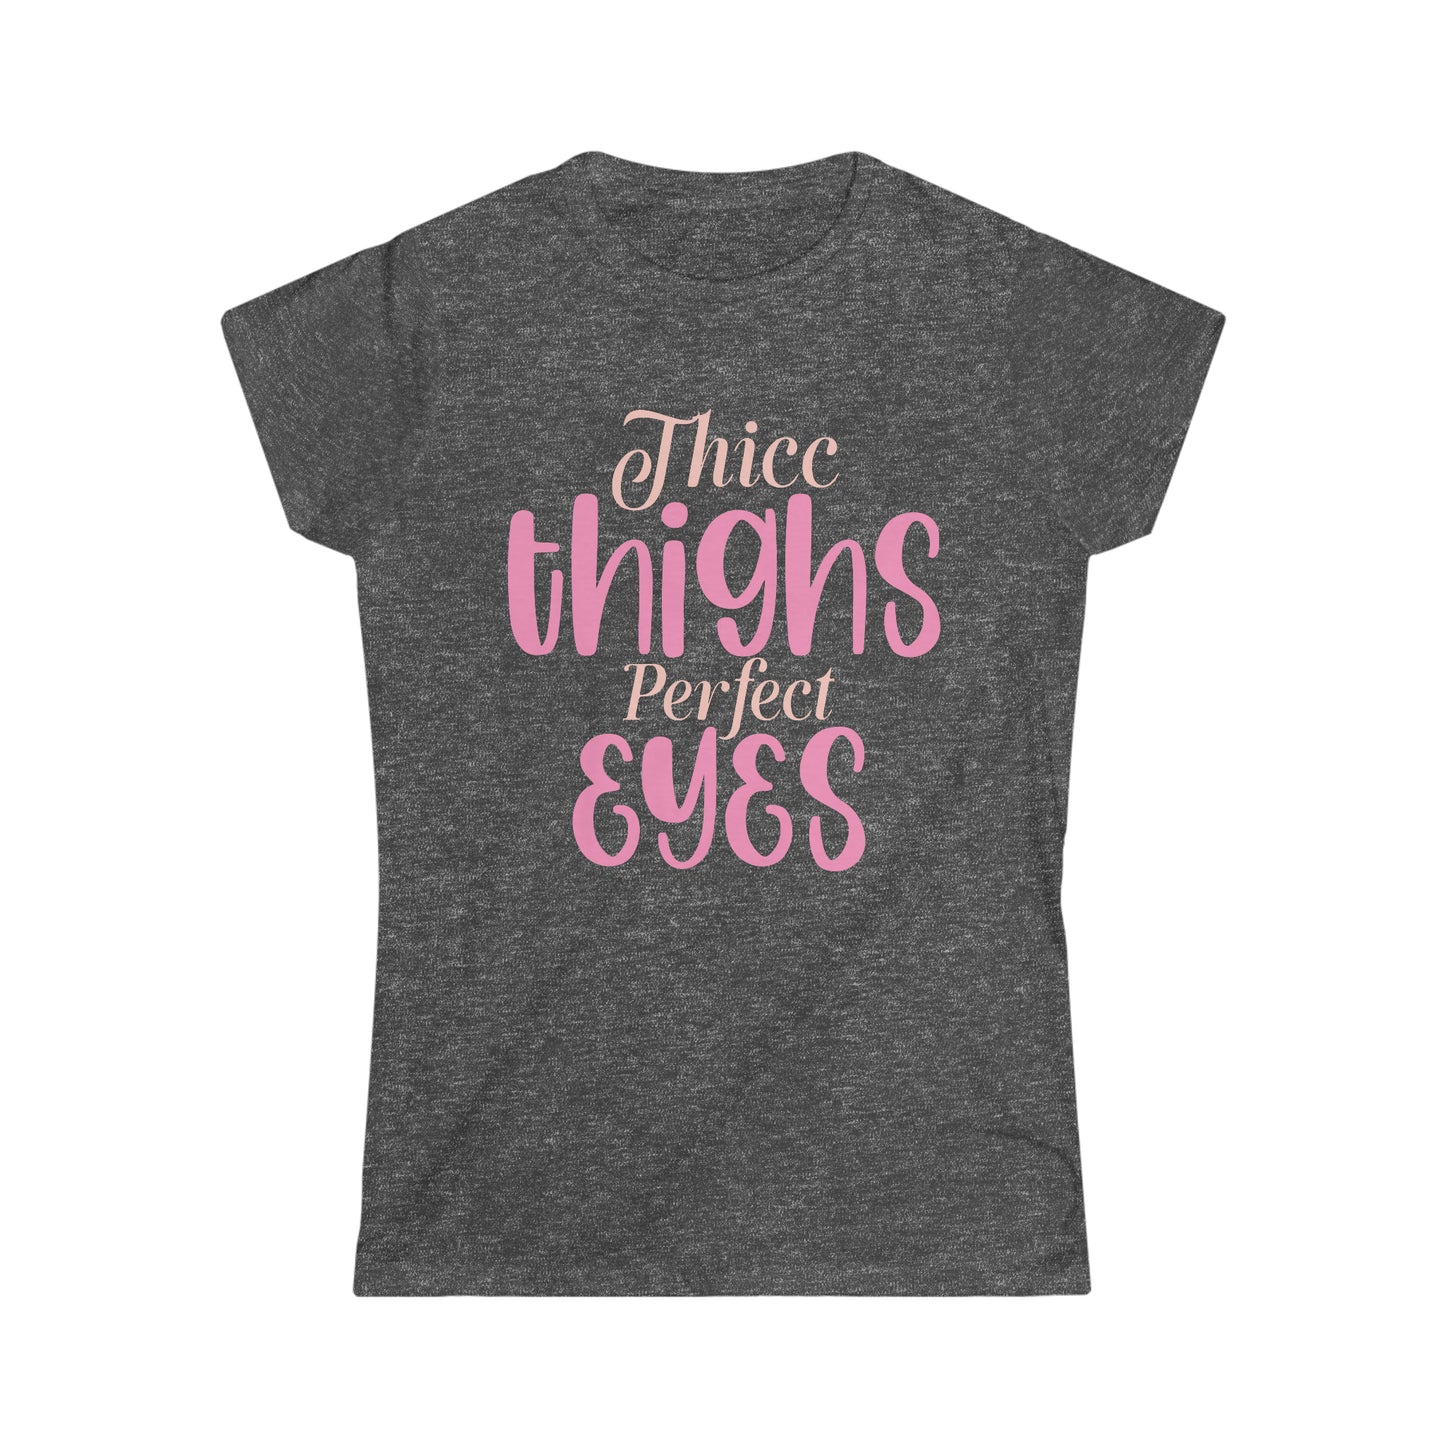 Thicc Thighs Perfect Eyes Women's Softstyle Tee